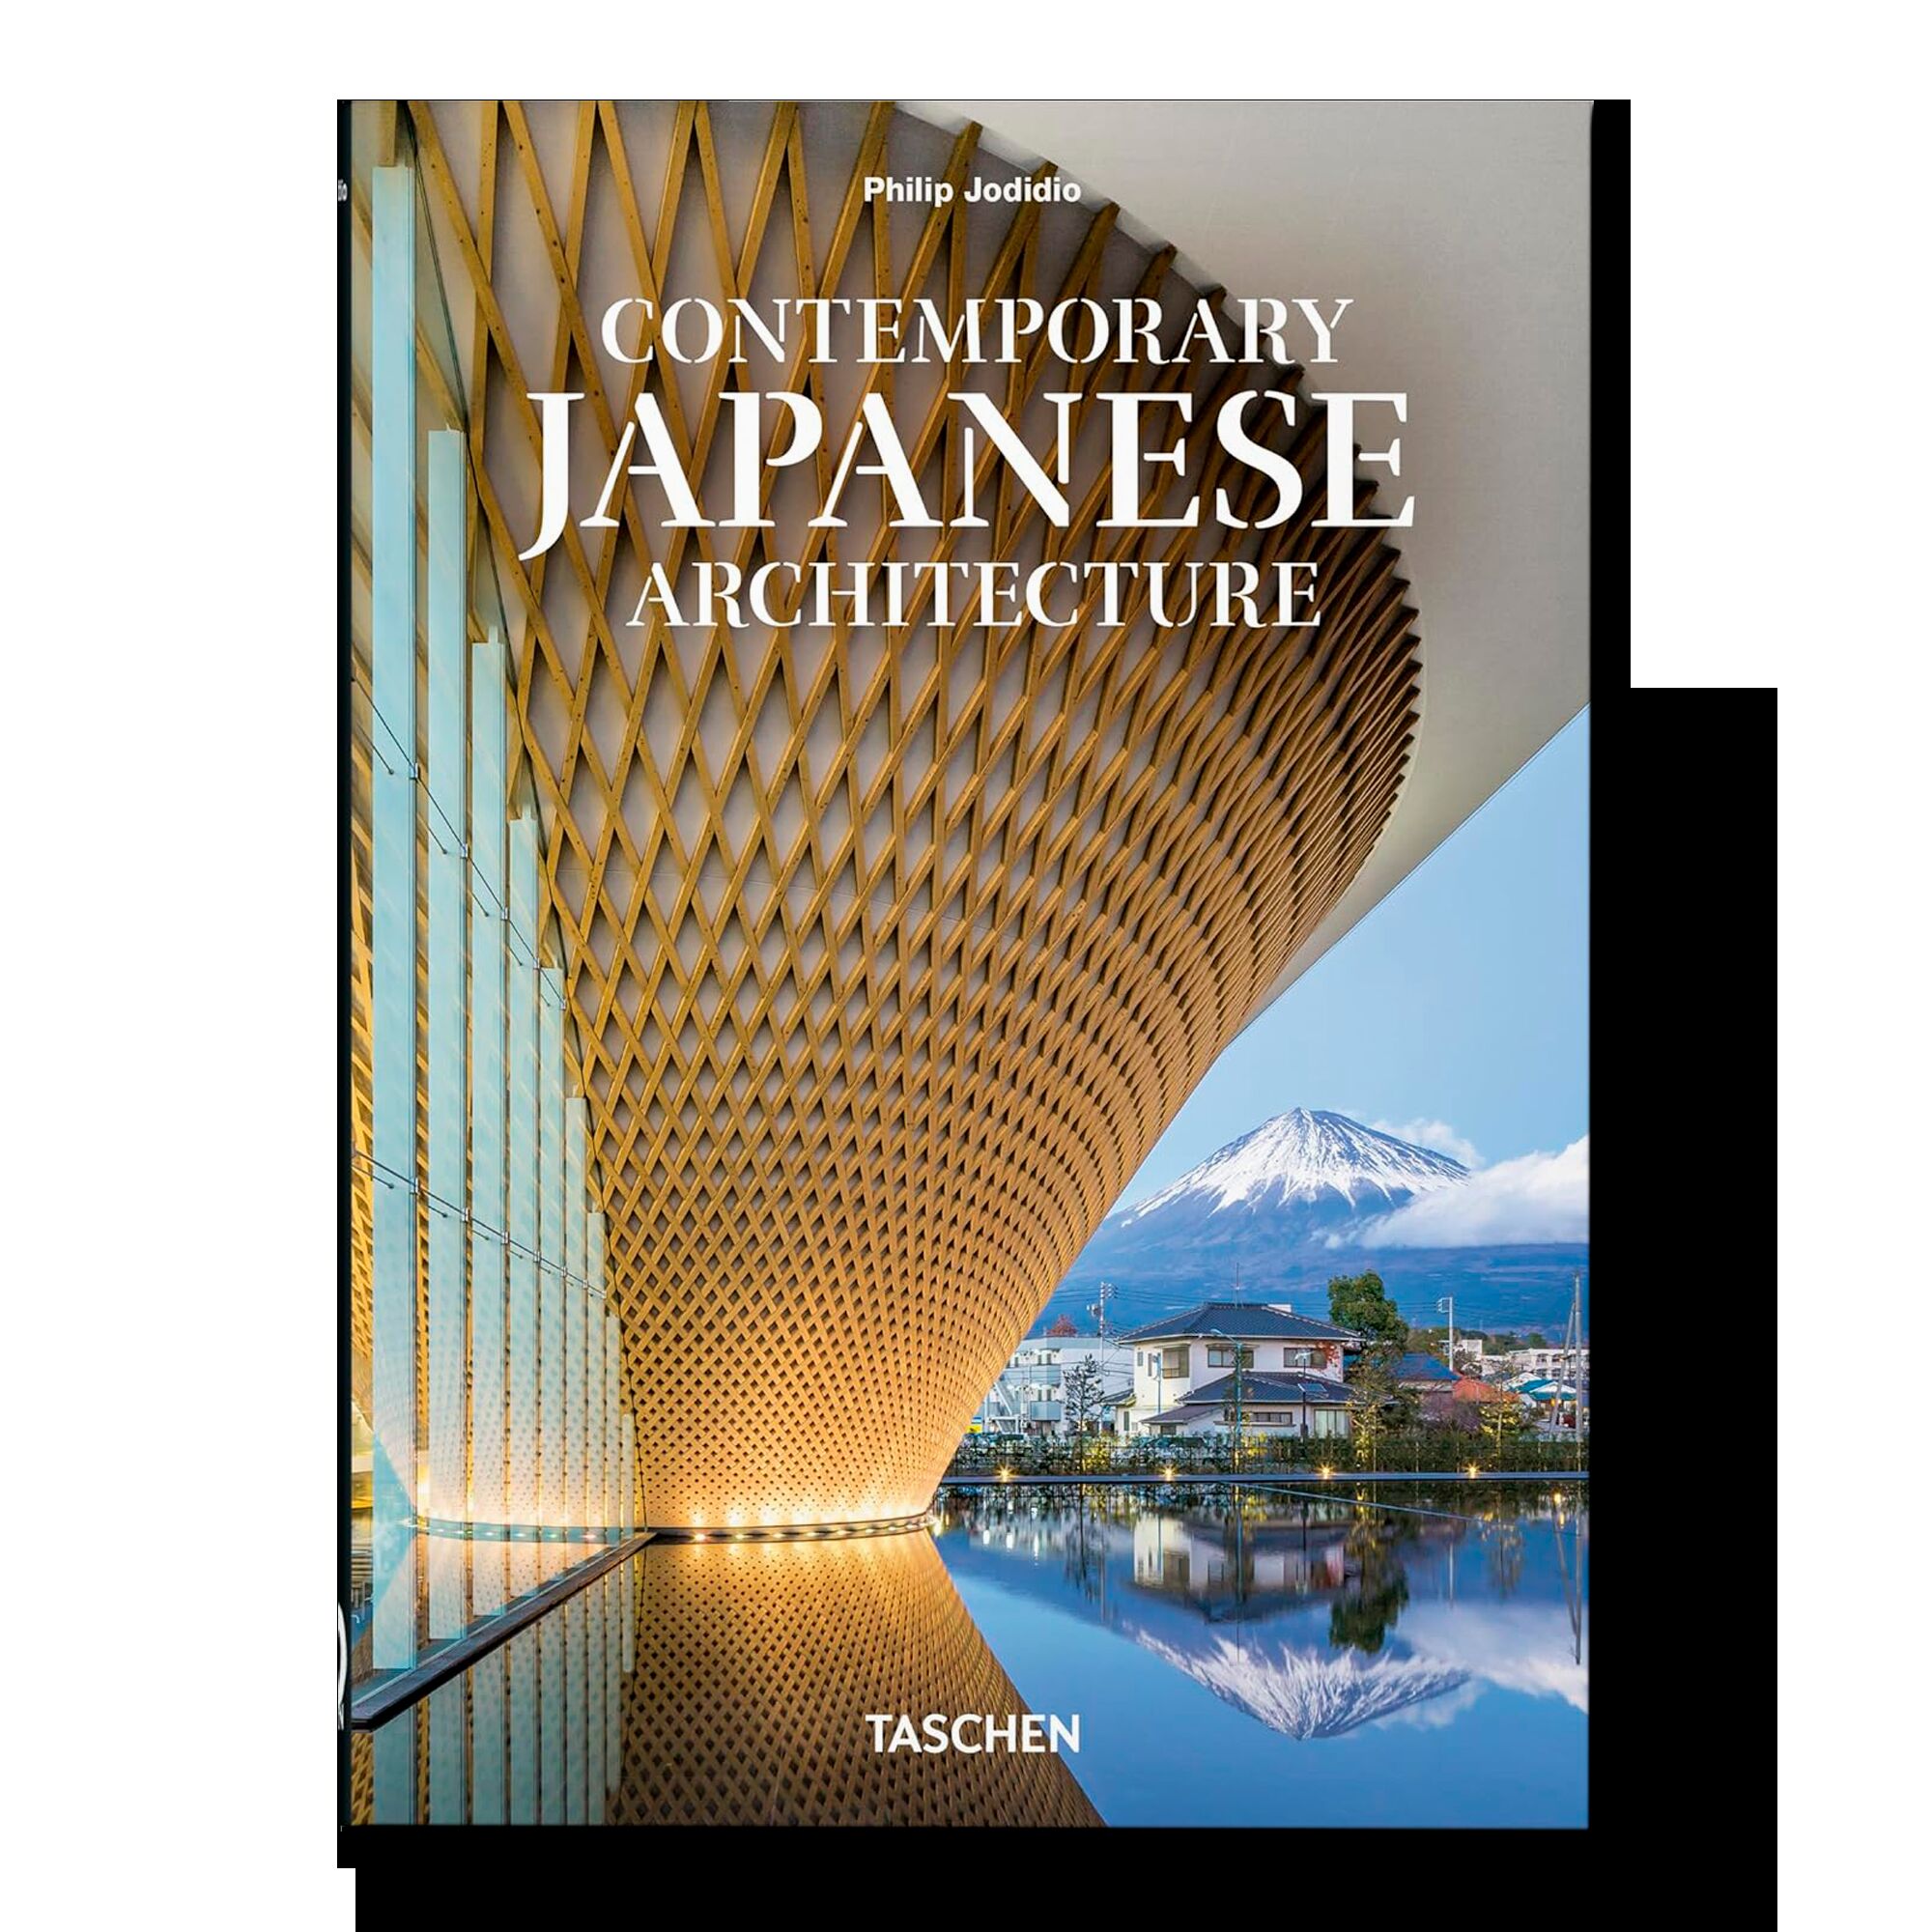 Contemporary Japanese Architecture (40th Anniversary Edition)